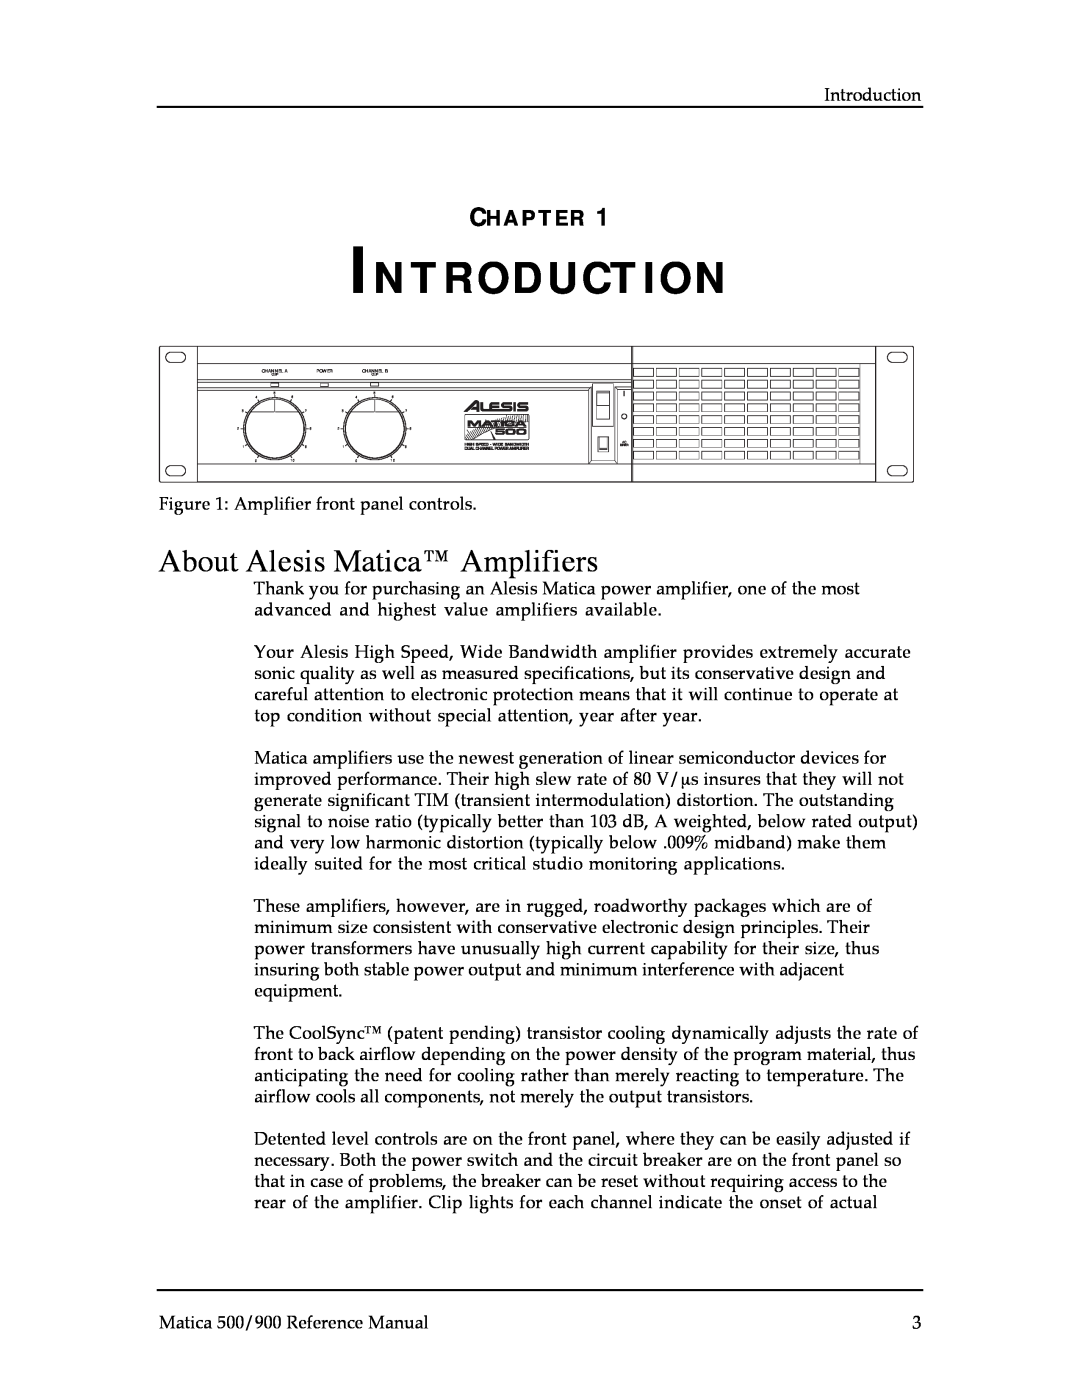 Alesis Matica 900, Matica 500 manual Introduction, About Alesis Maticaª Amplifiers, Chapter 